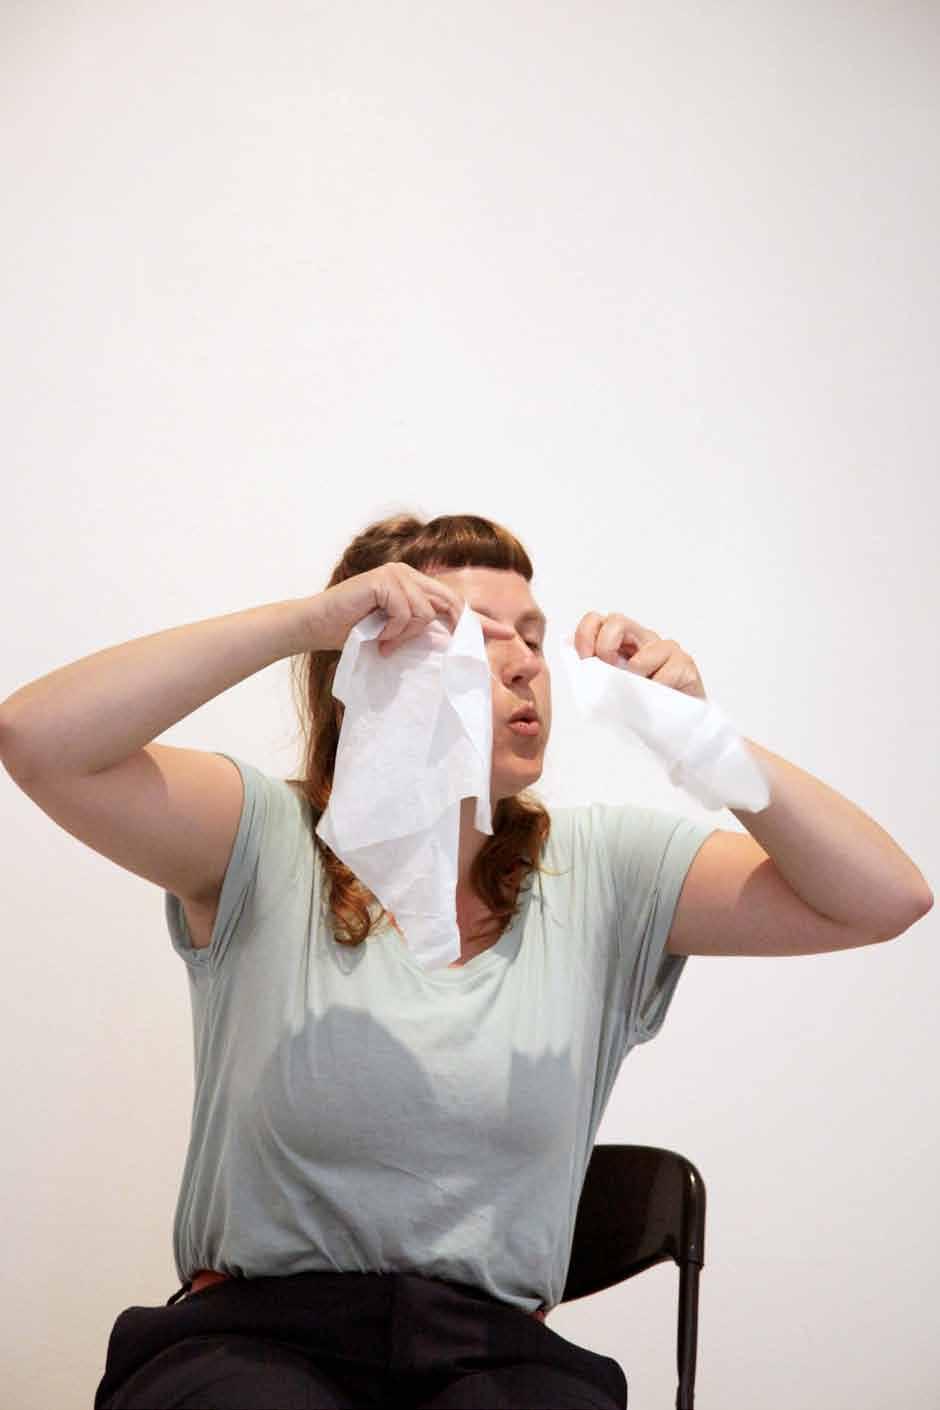 15. one spoon performance, 2013 duration: 35 min. One full spoon of water is poured over a tissue.